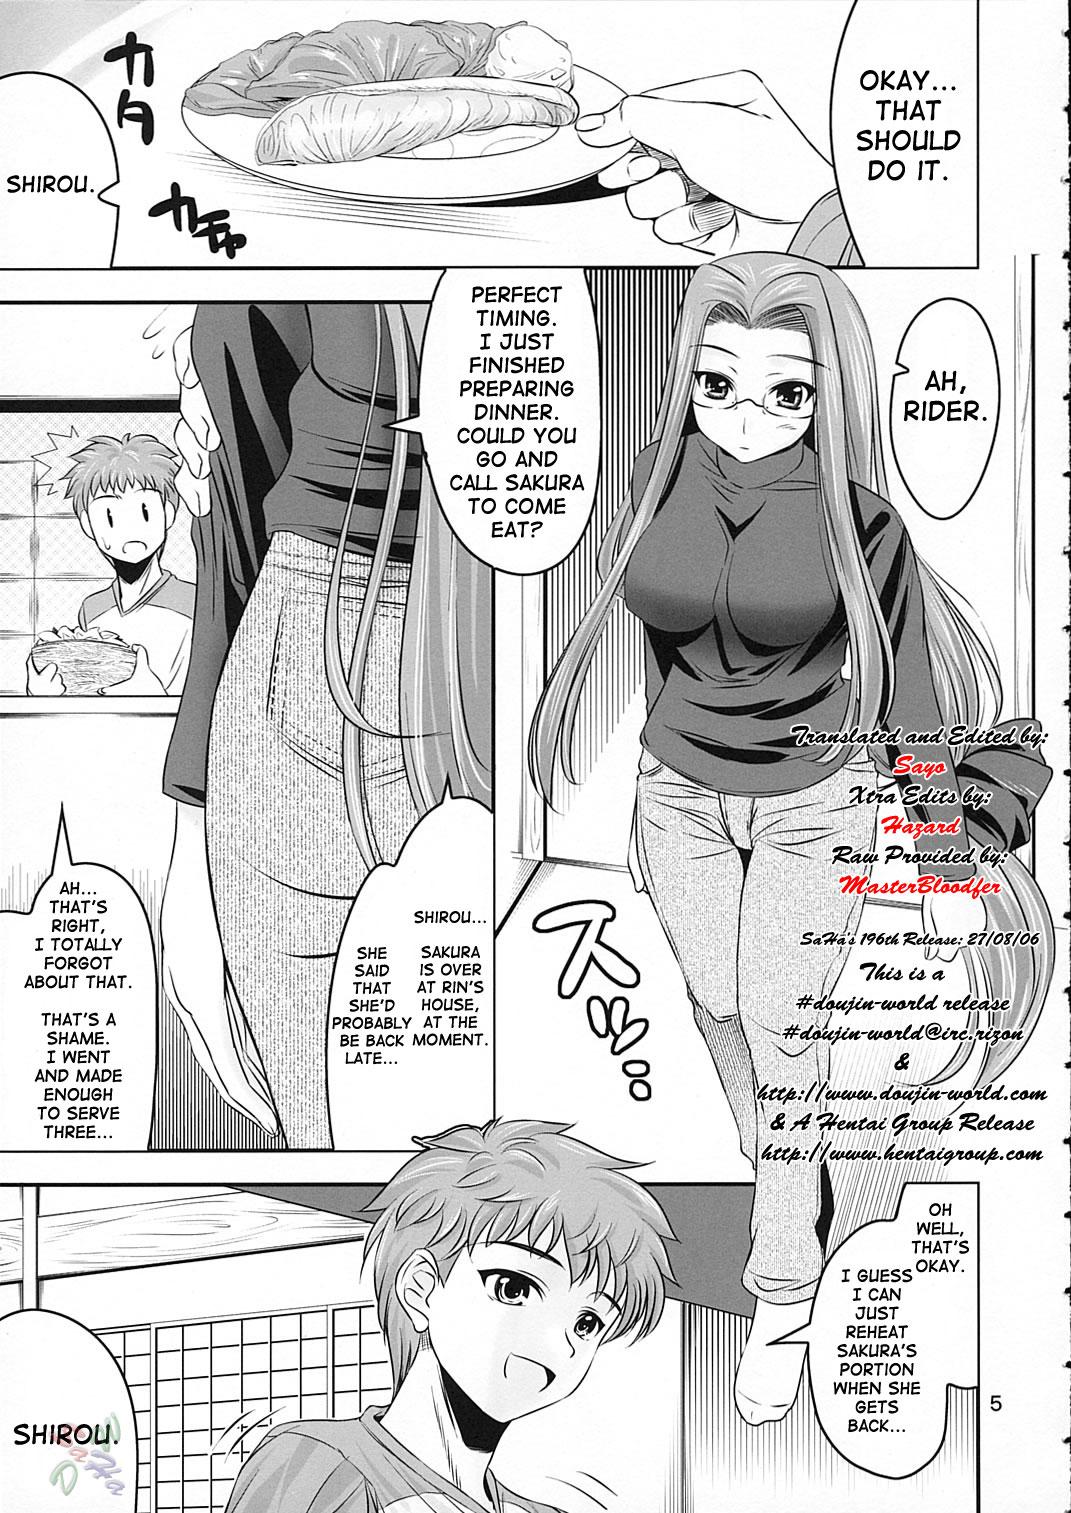 Punished Simiken - Fate stay night Dom - Page 5